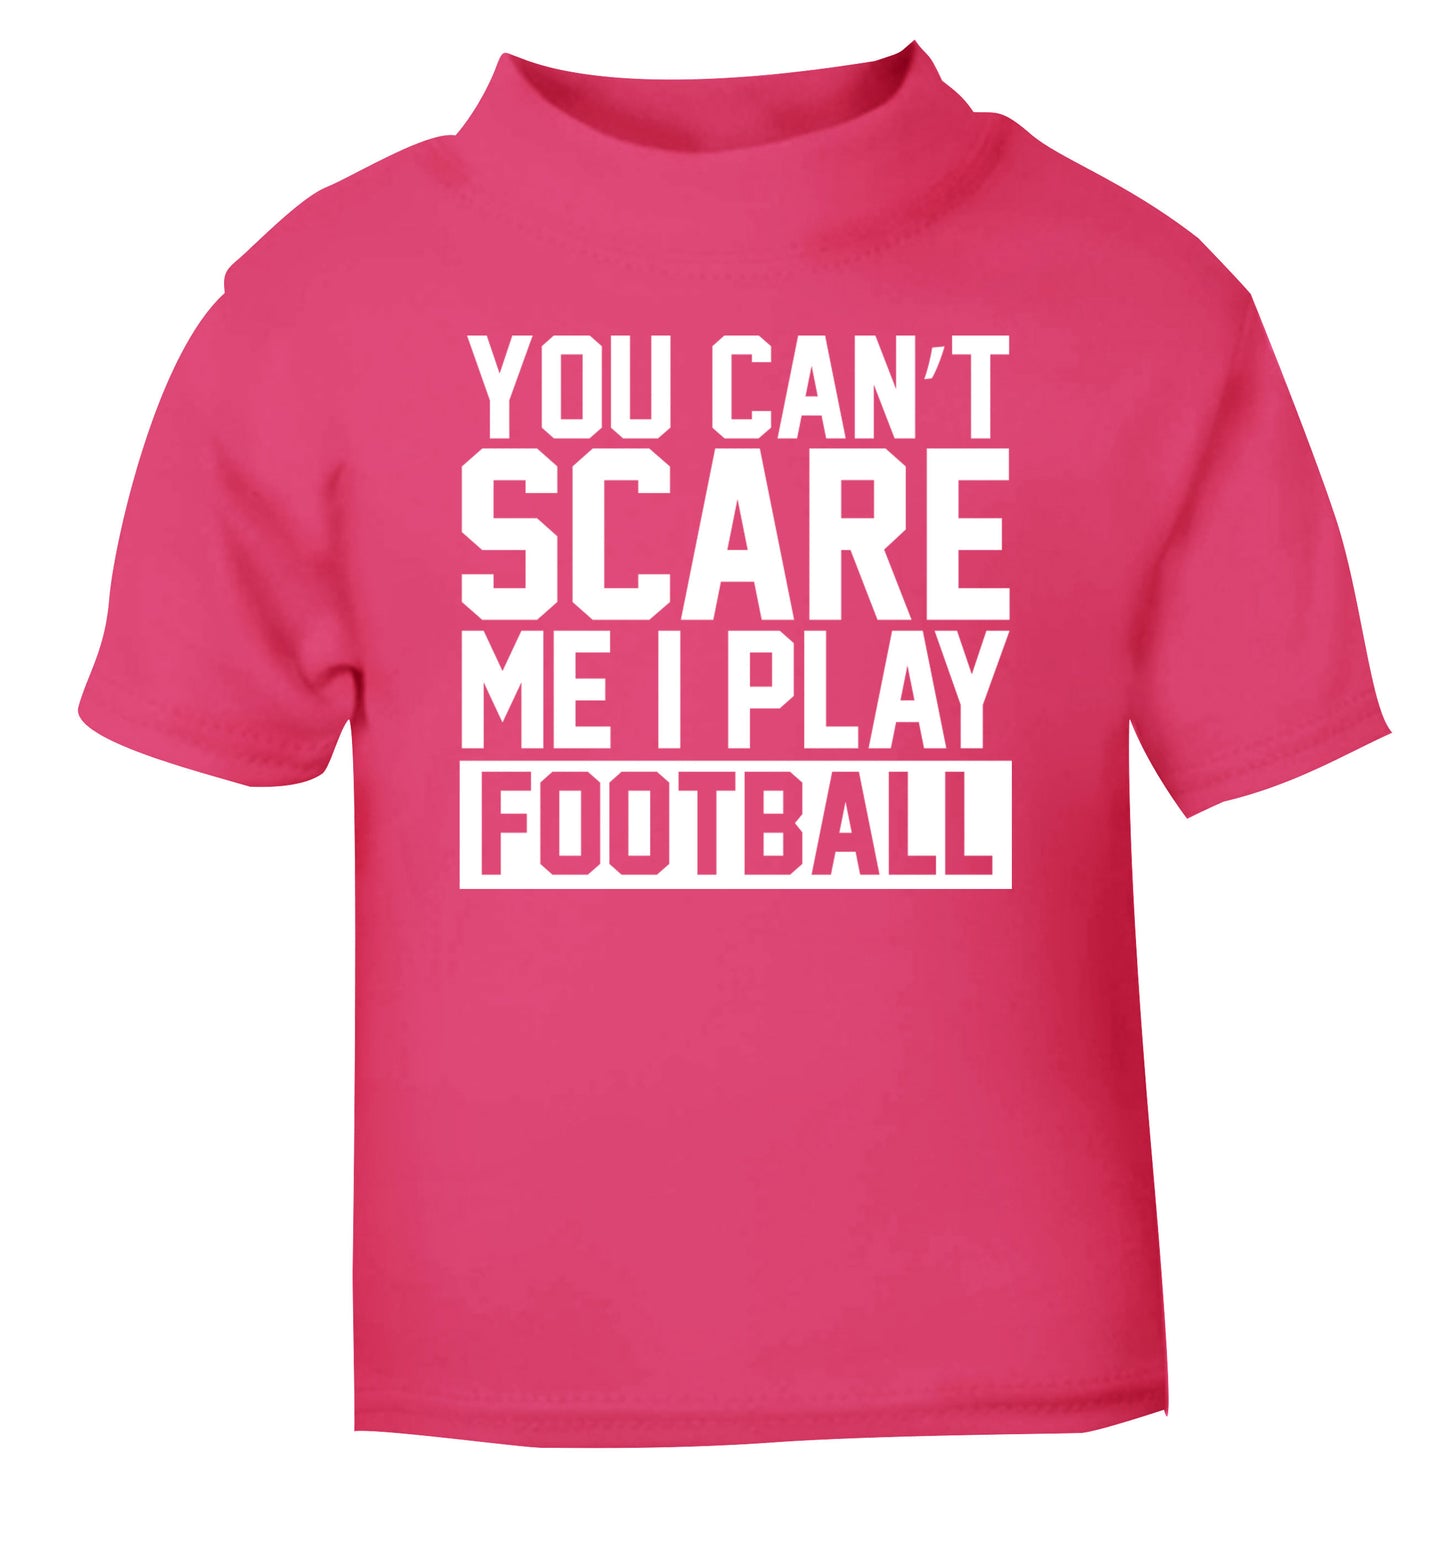 You can't scare me I play football pink Baby Toddler Tshirt 2 Years